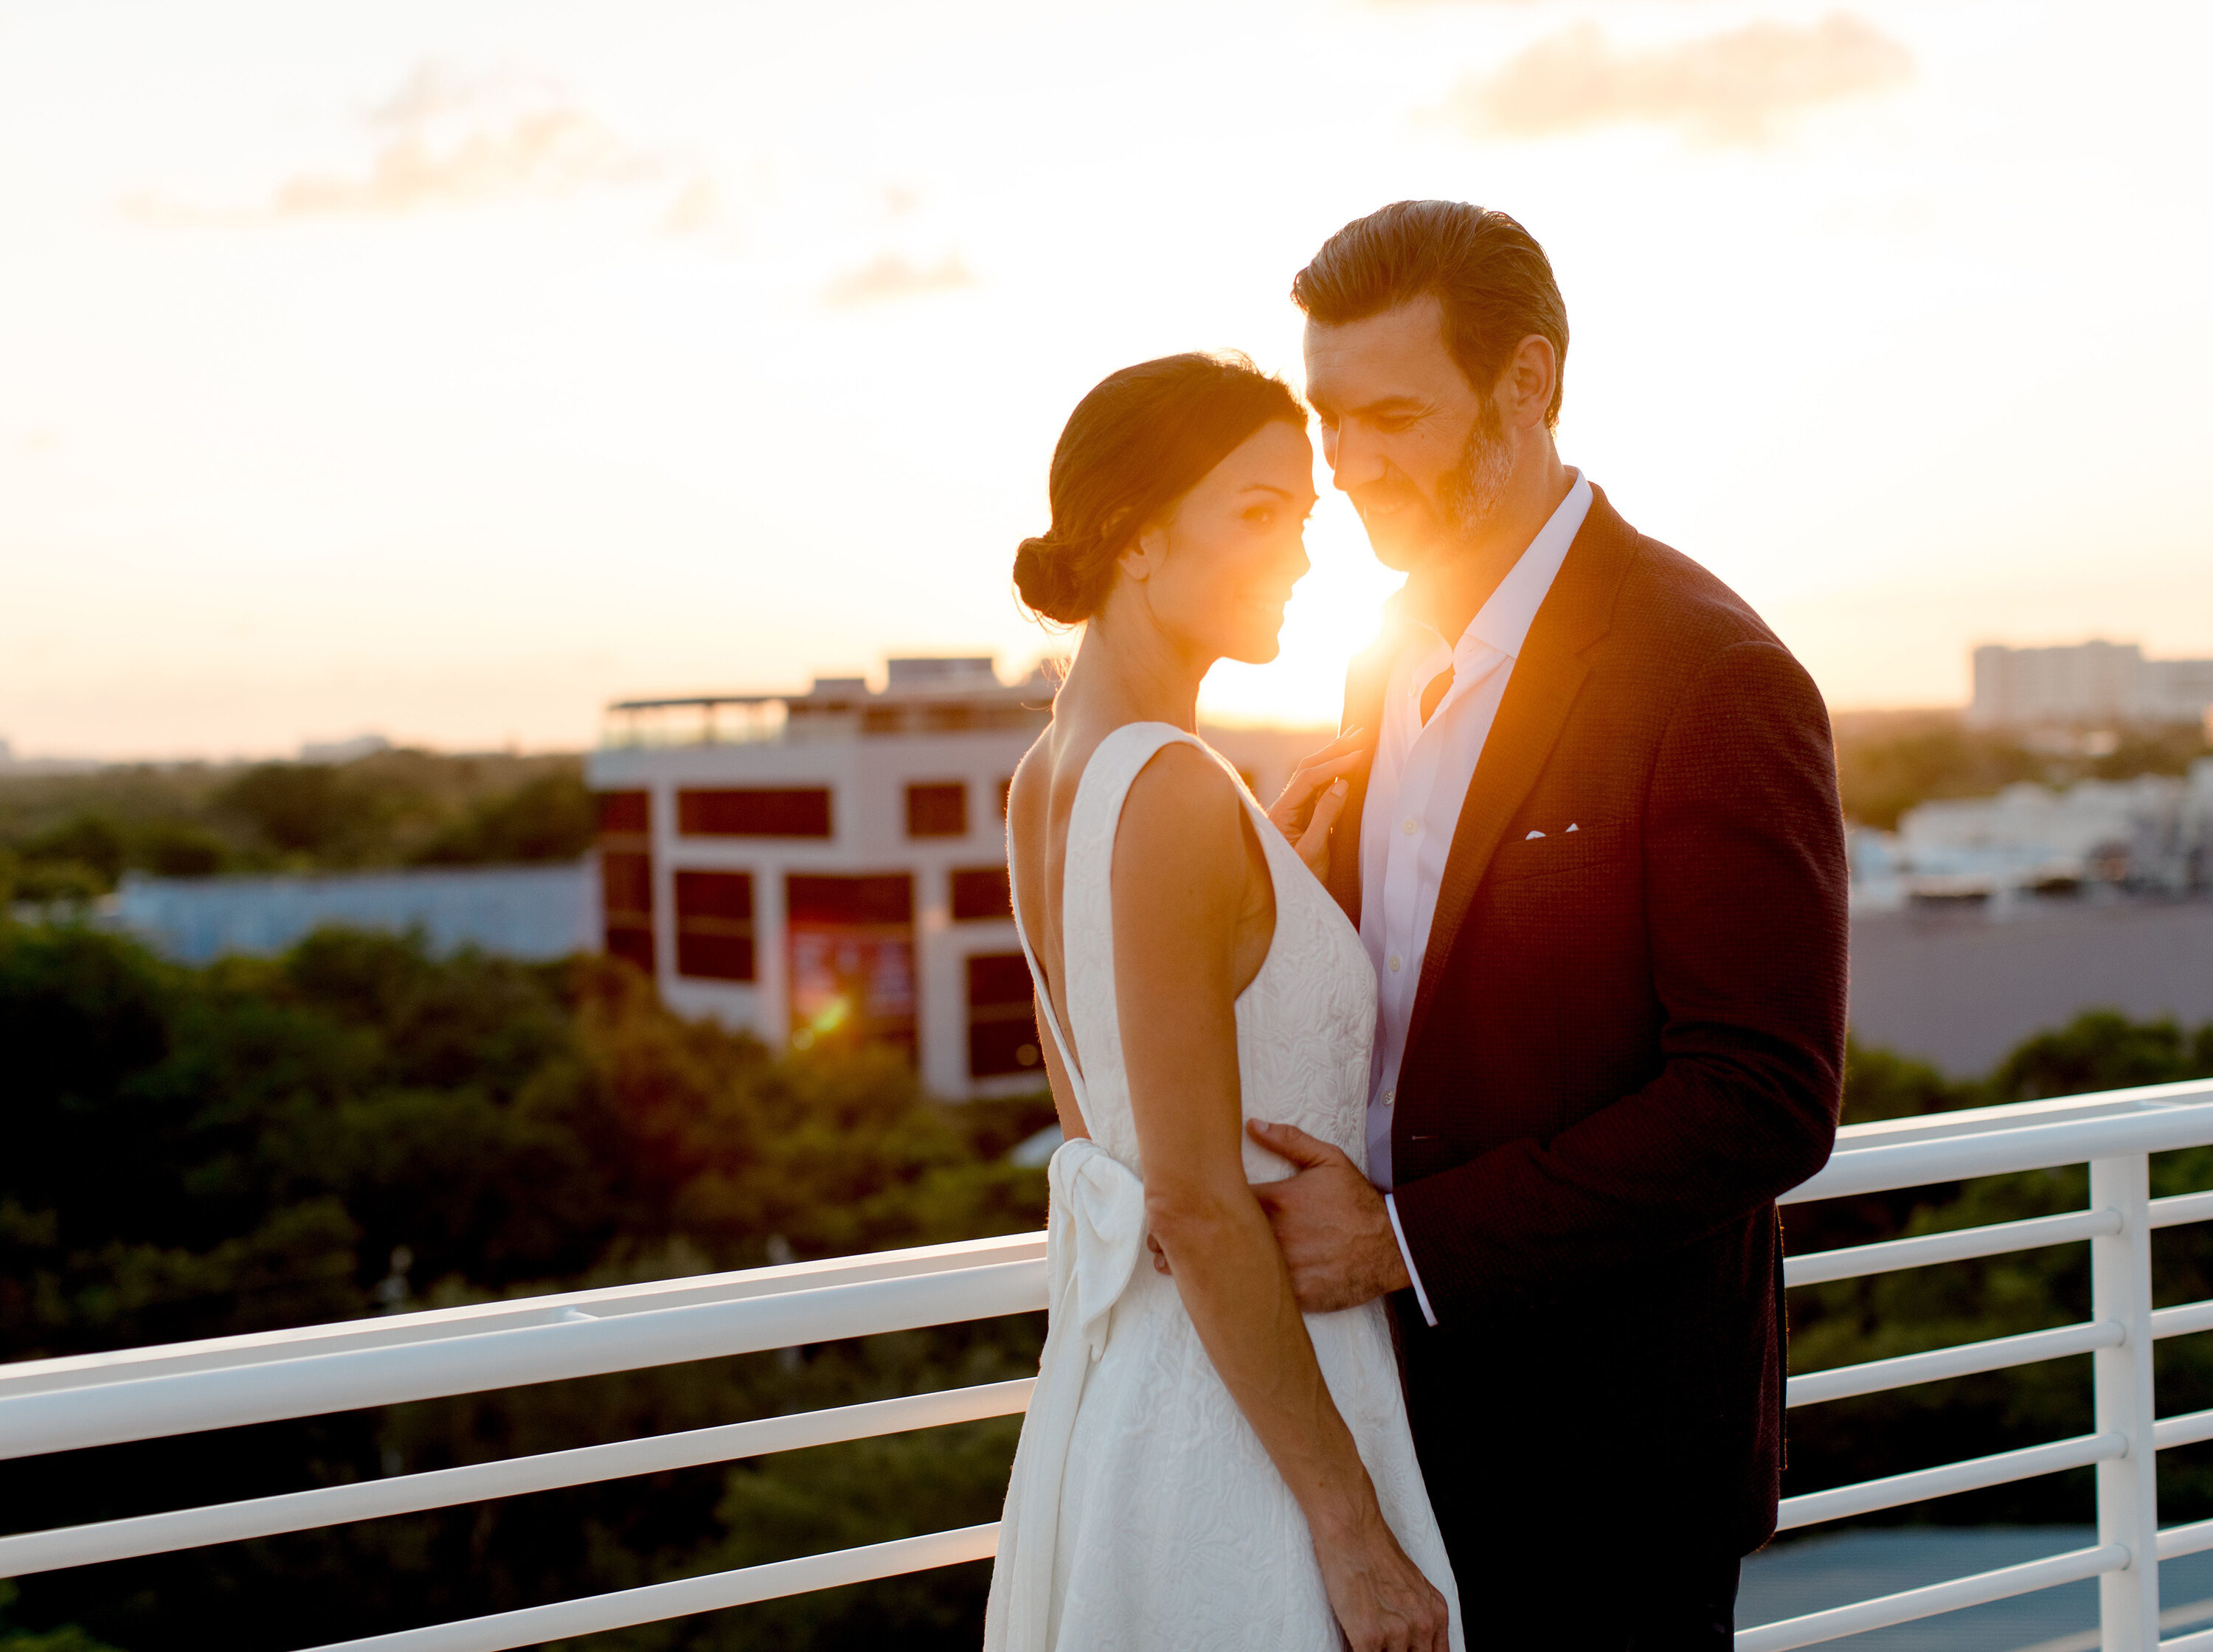 external shot of bride and groom overlooking a sunset.